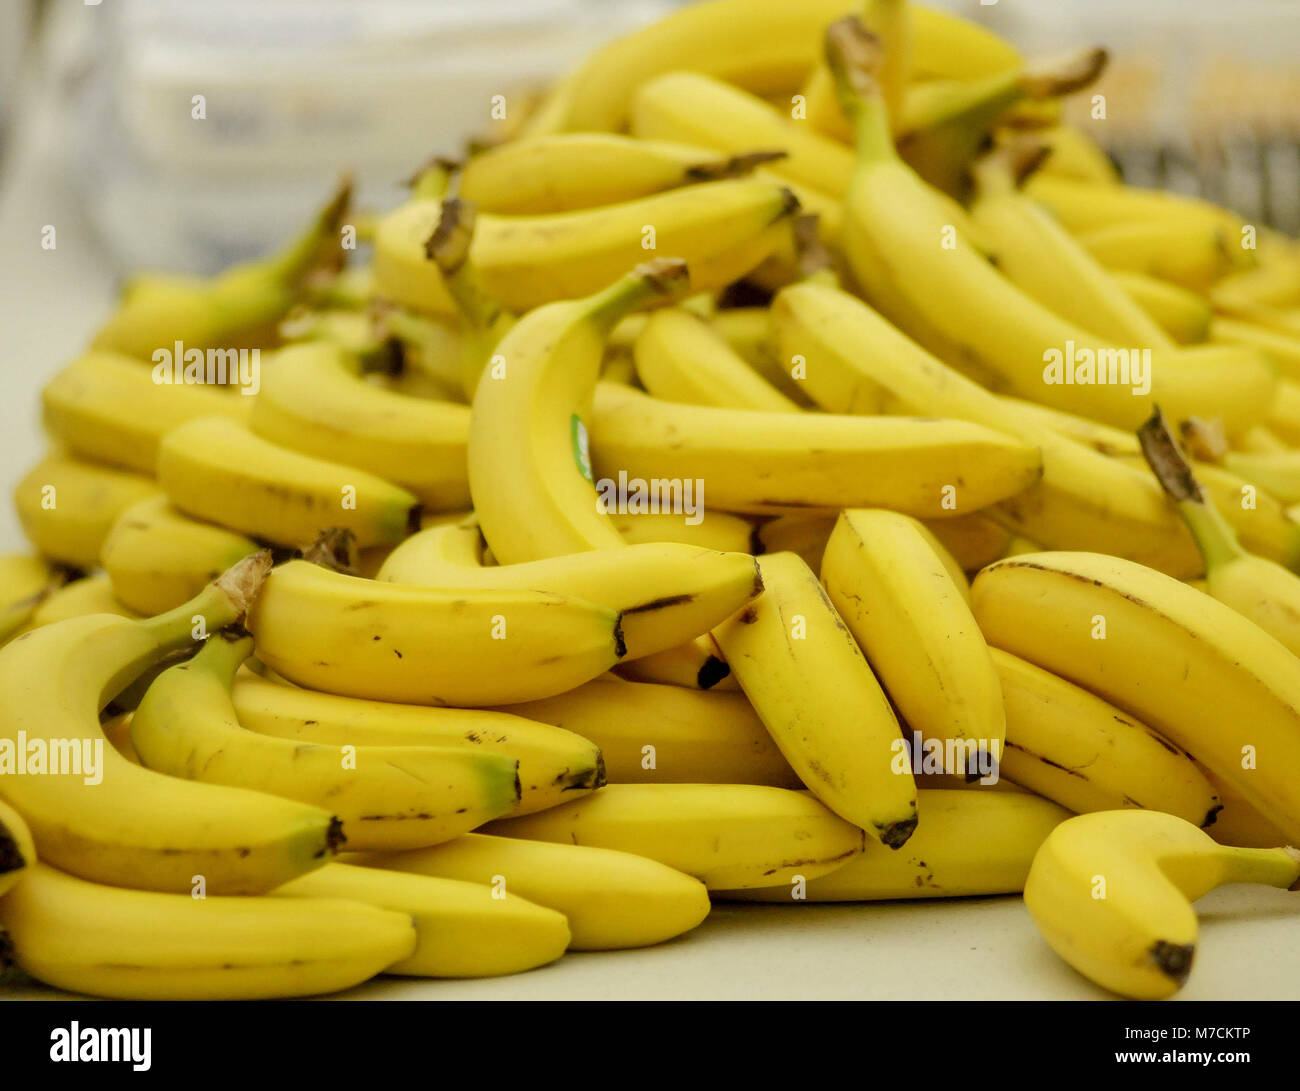 A pile of bananas on a table Stock Photo